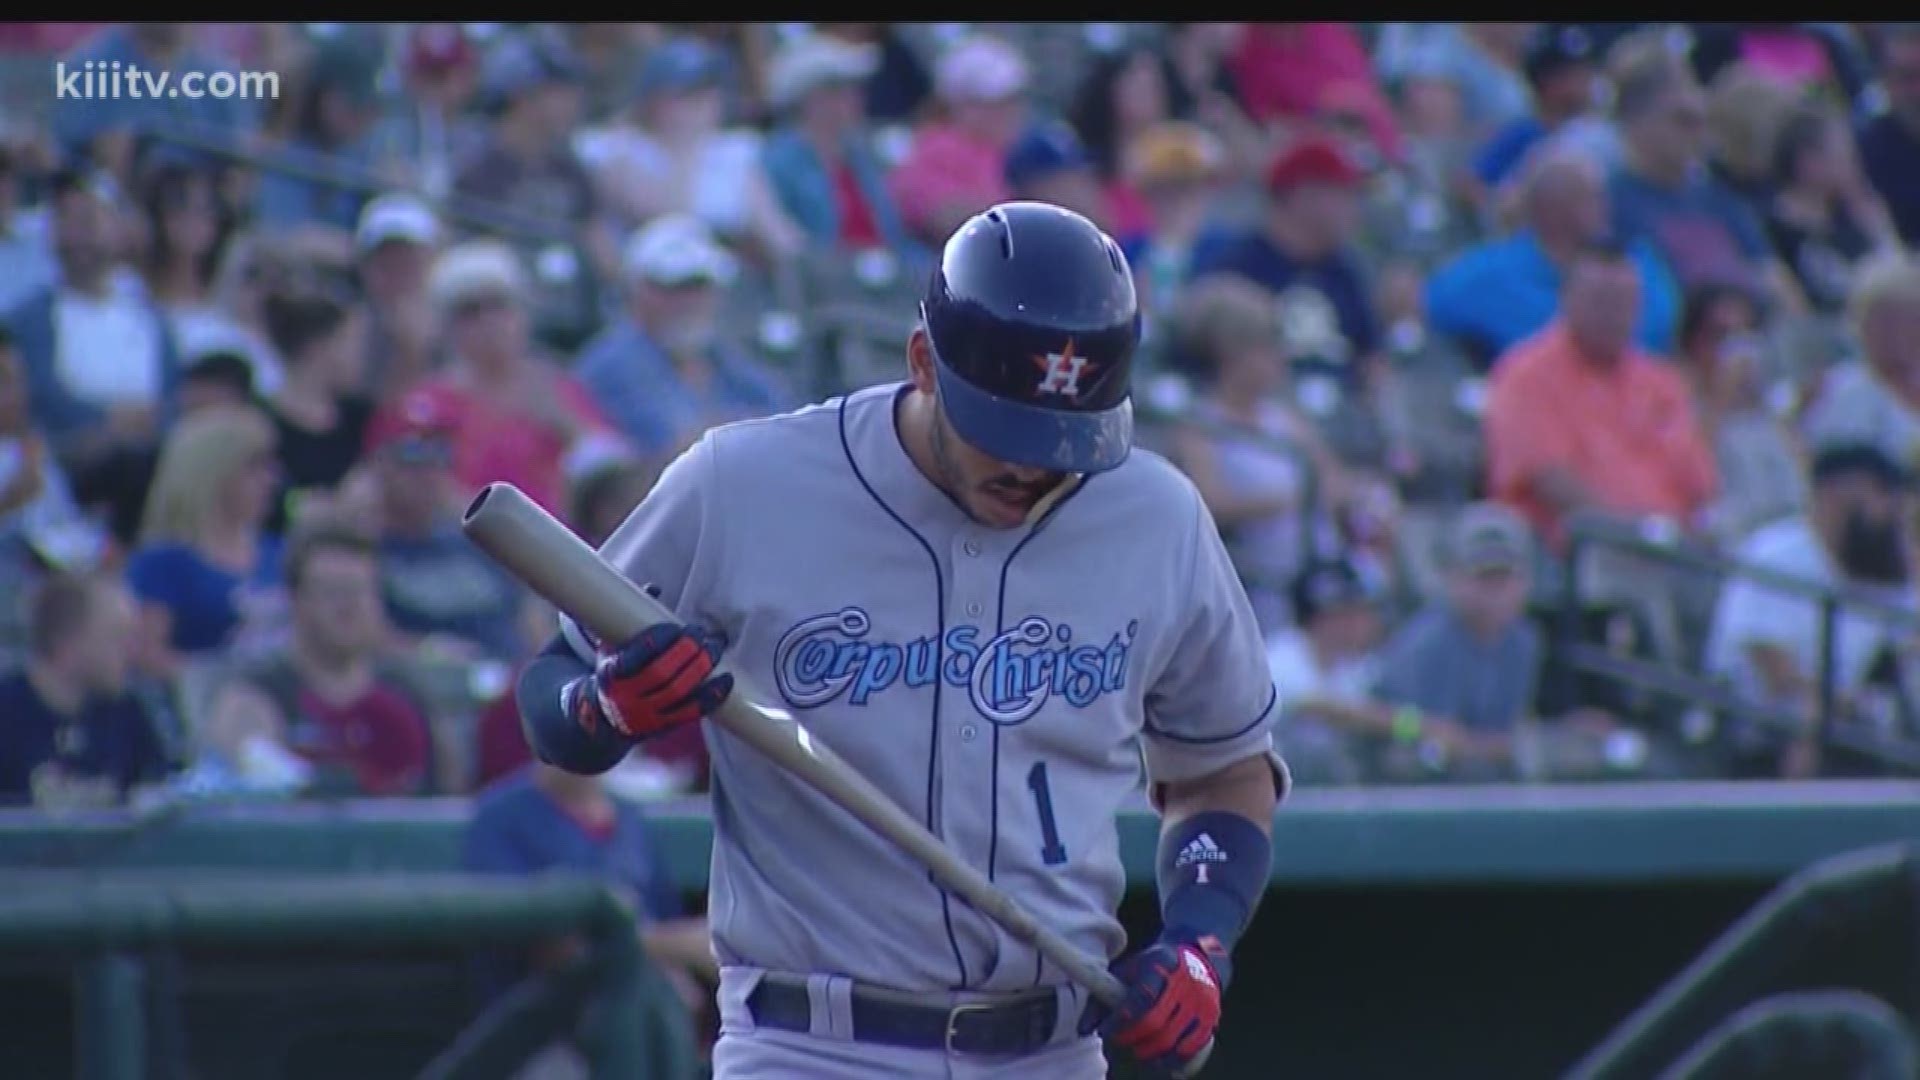 Carlos Correa went 1 for 3 with a homerun in a Hooks 5-3 loss to the RoughRiders. 